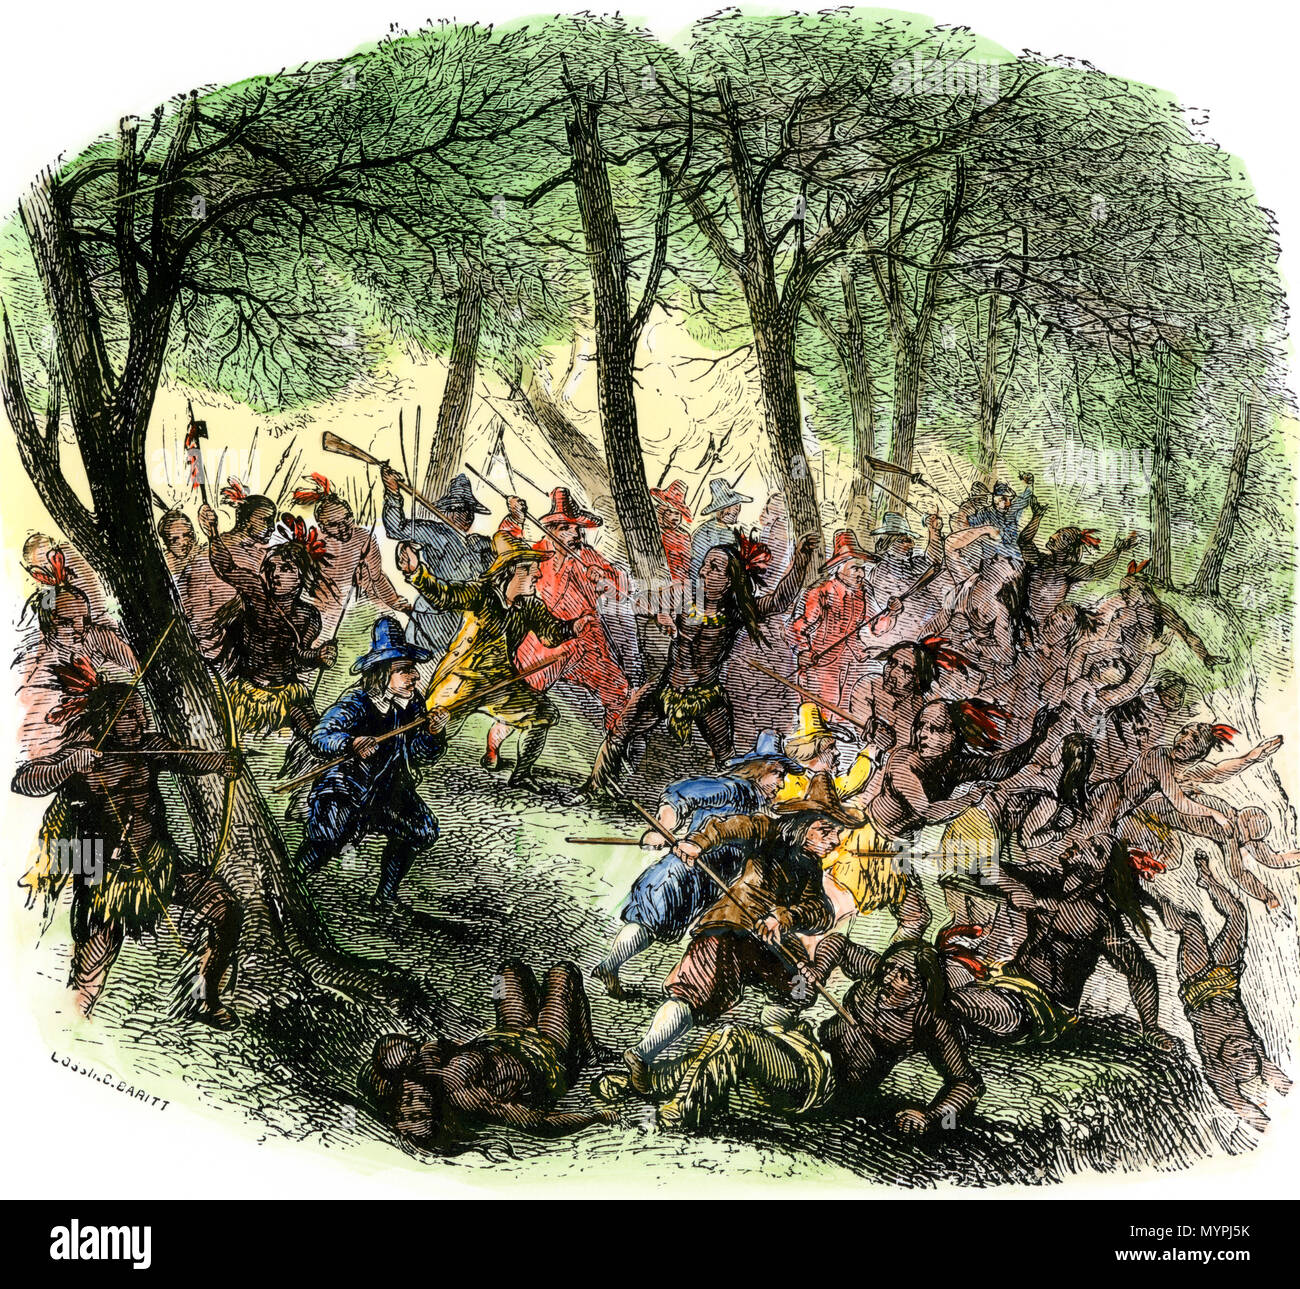 Massacre of Mohawks by New Netherlands Governor Kieft, 1640s. Hand-colored woodcut Stock Photo